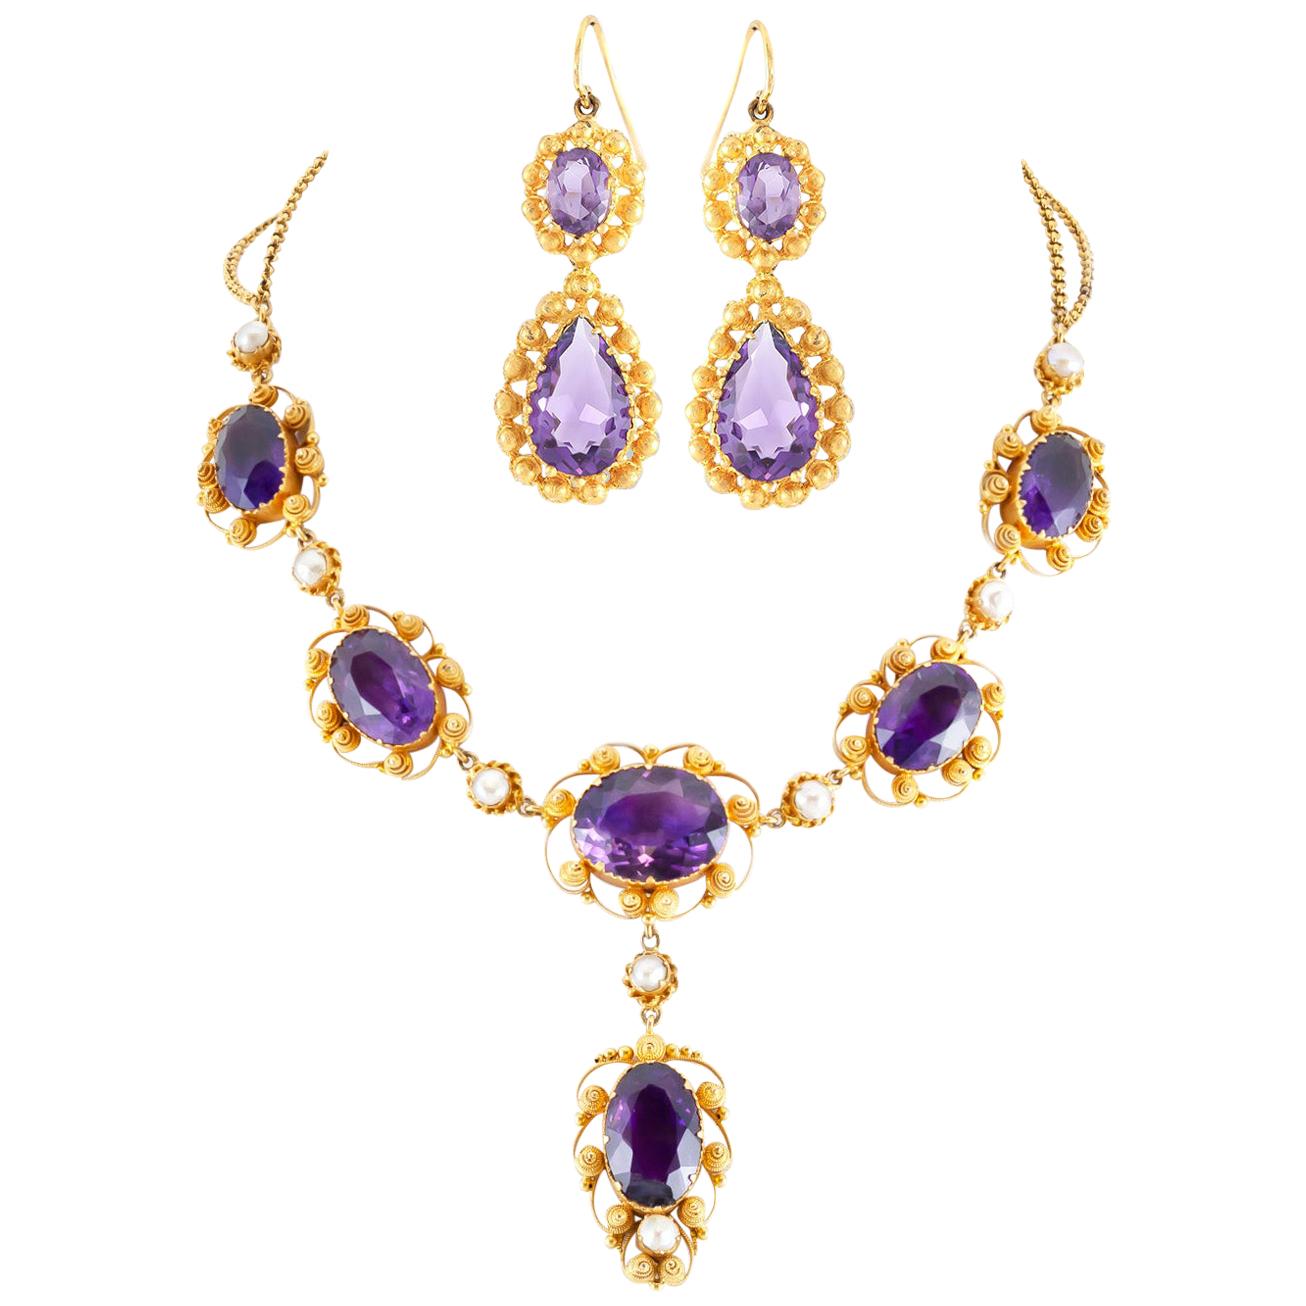 Victorian Amethyst and Pearl Necklace and Earrings Set